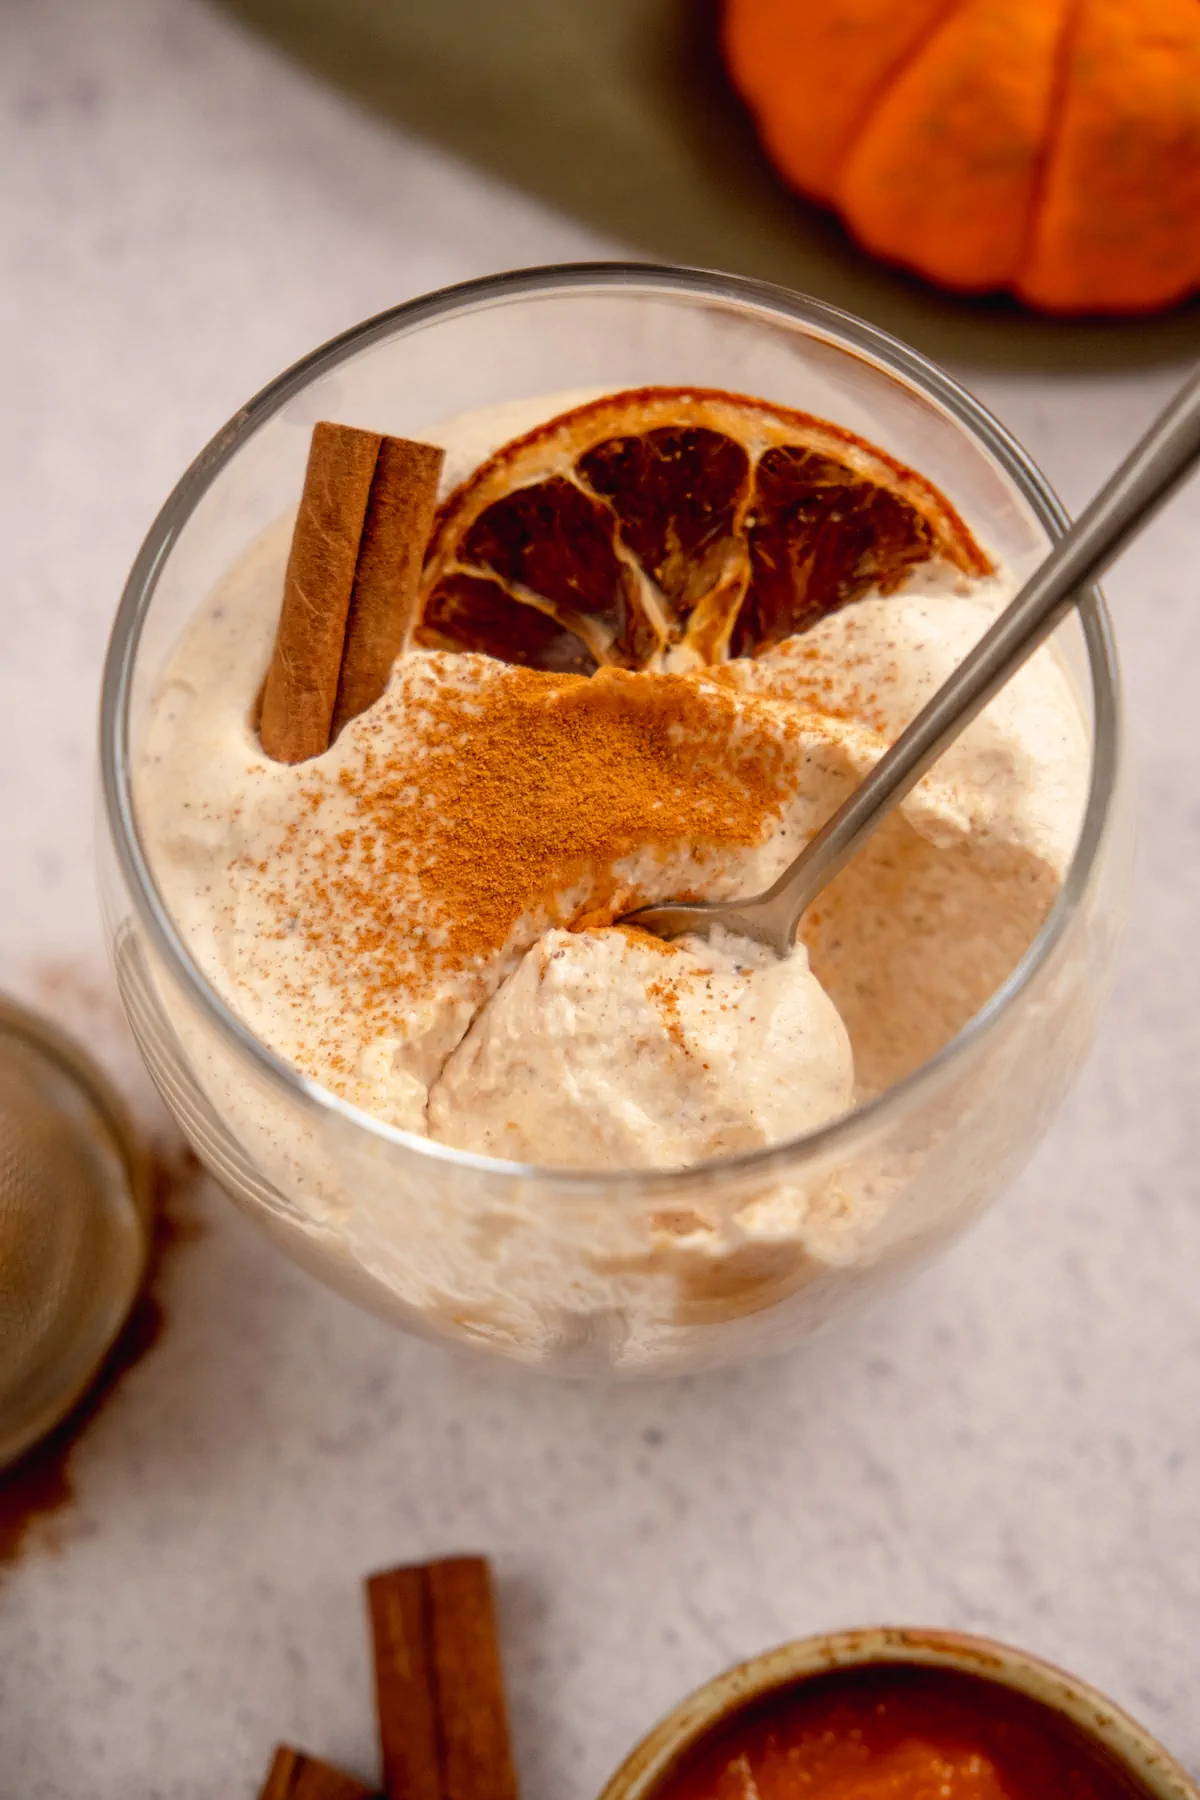 A focused photo of homemade keto pumpkin cheesecake mousse getting eaten with a spoon from a transparent glass garnished with cinnamon powder, a dried orange slice and cinnamon stick.